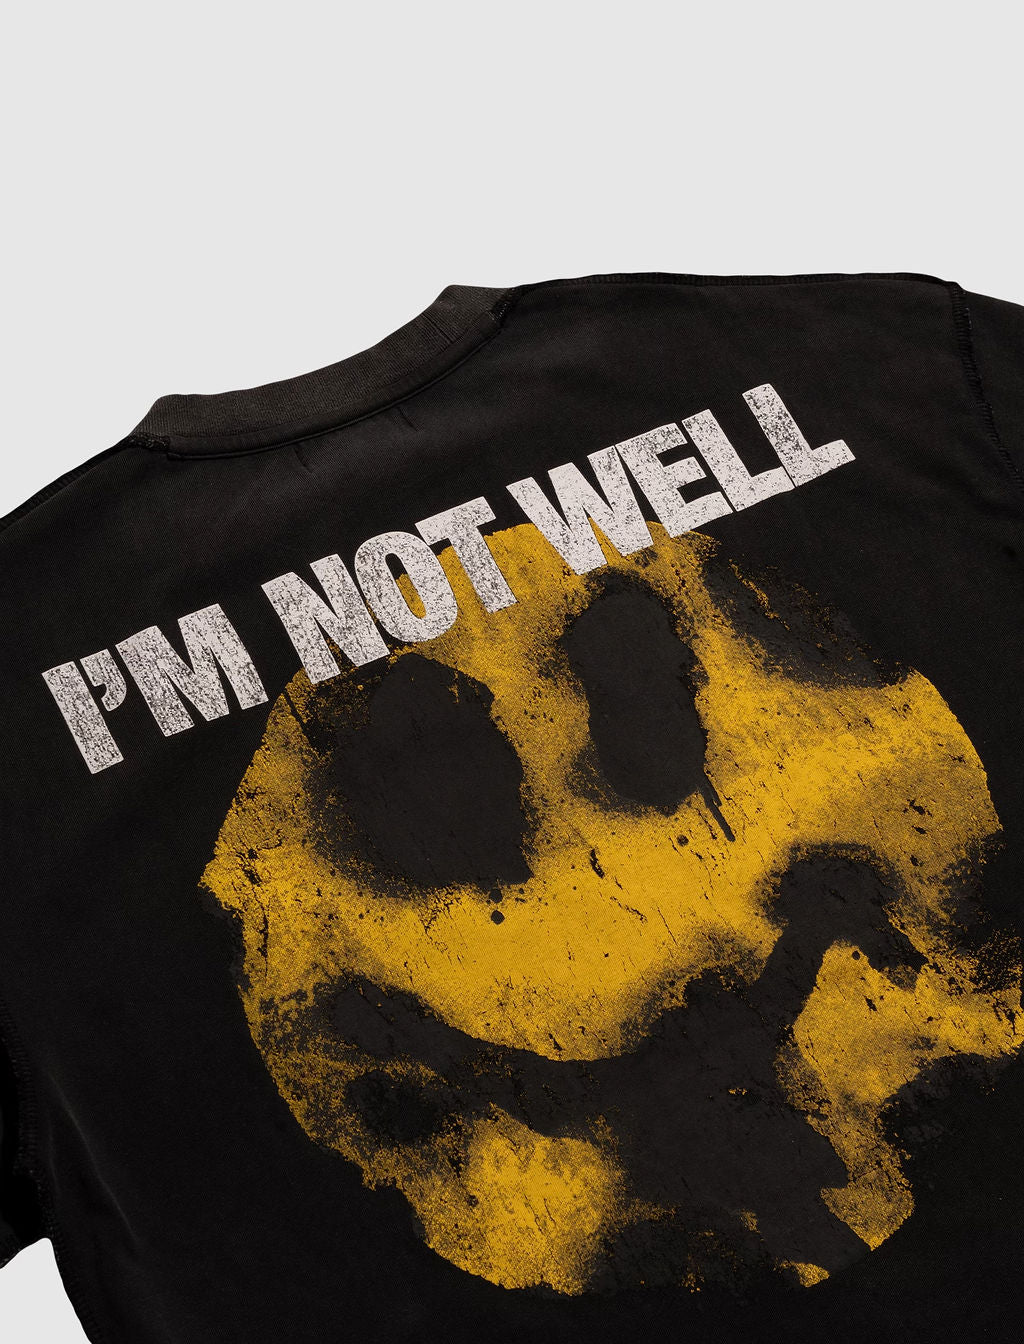 SMILEY FACE LONG SLEEVE T-SHIRT 2.0 IN WASHED BLACK